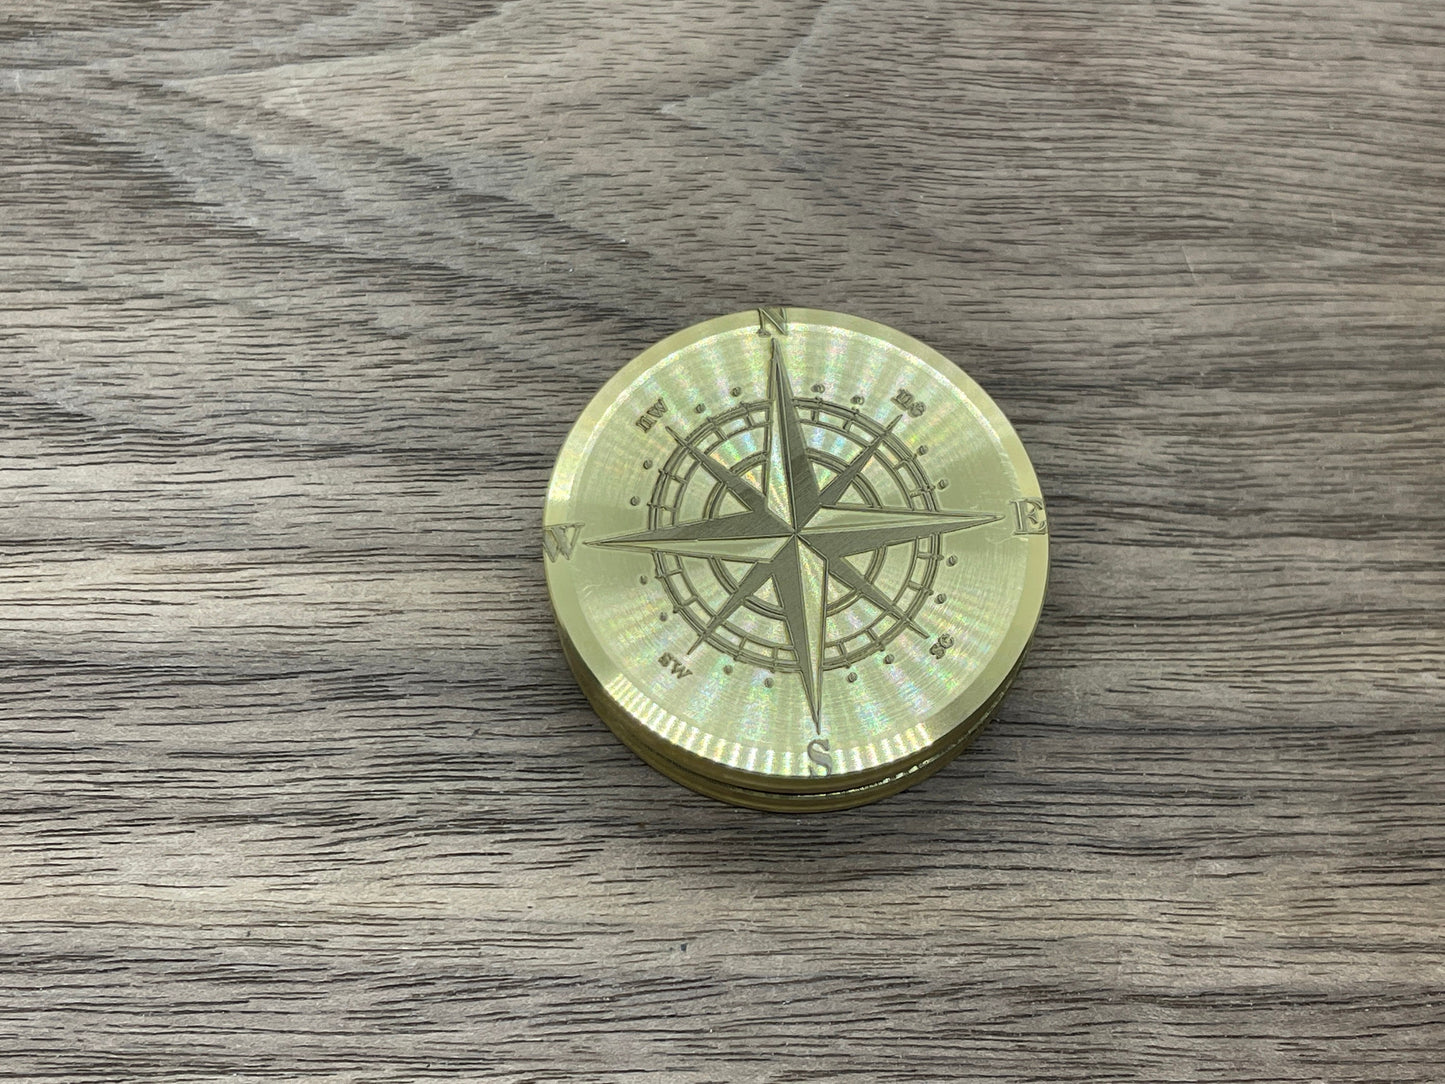 HAPTIC Coins COMPASS engraved Brass Fidget toy Every Day Carry Anxiety relief EDC Coin MetonBoss 50th birthday gift ideas Adhd Fidget toy